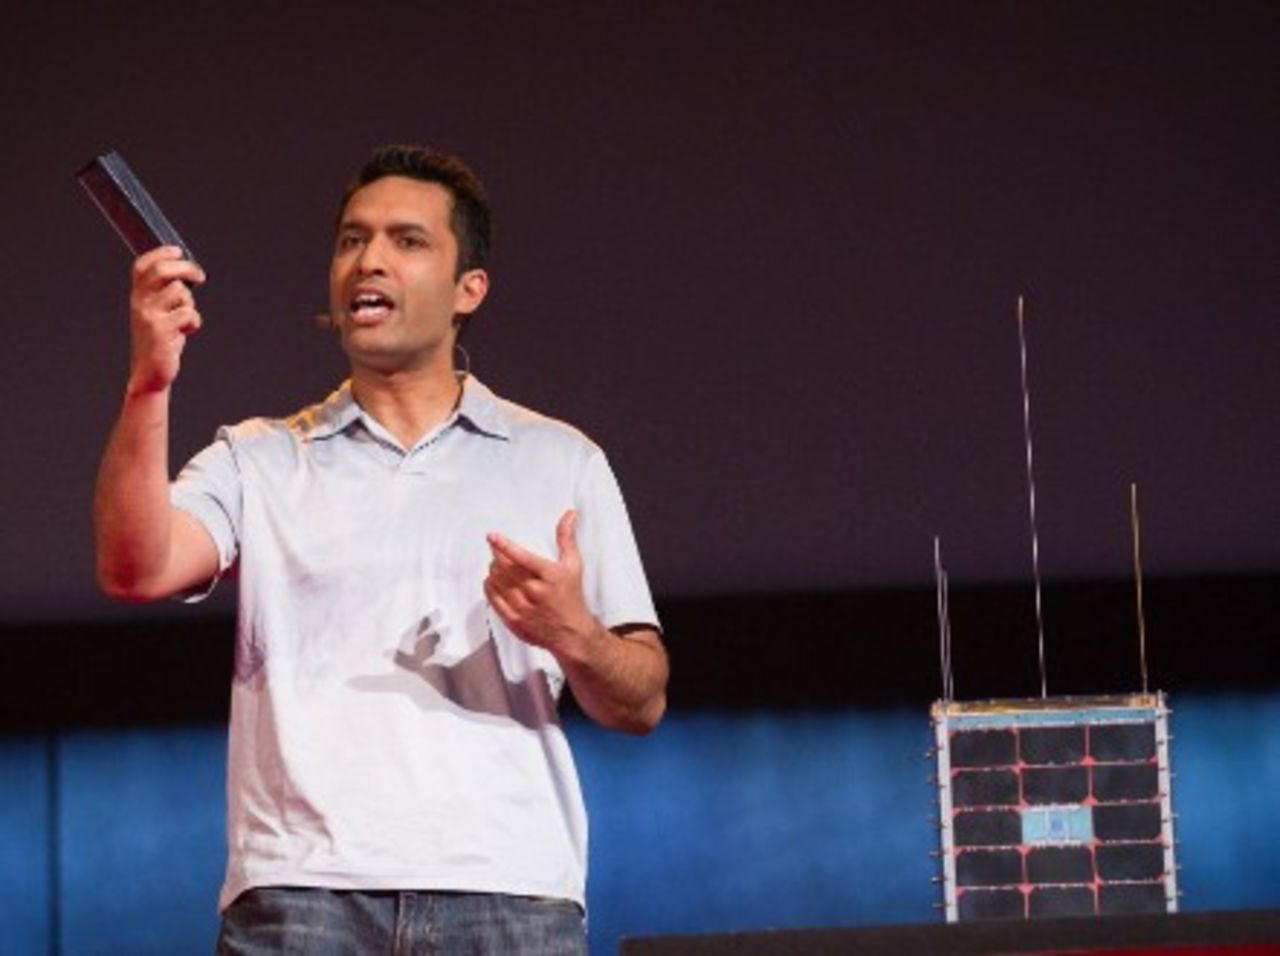 Outernet founder Syed Karim explains his plan to get information from the web to the half of humanity that currently lacks access to it at TEDGlobal 2014.